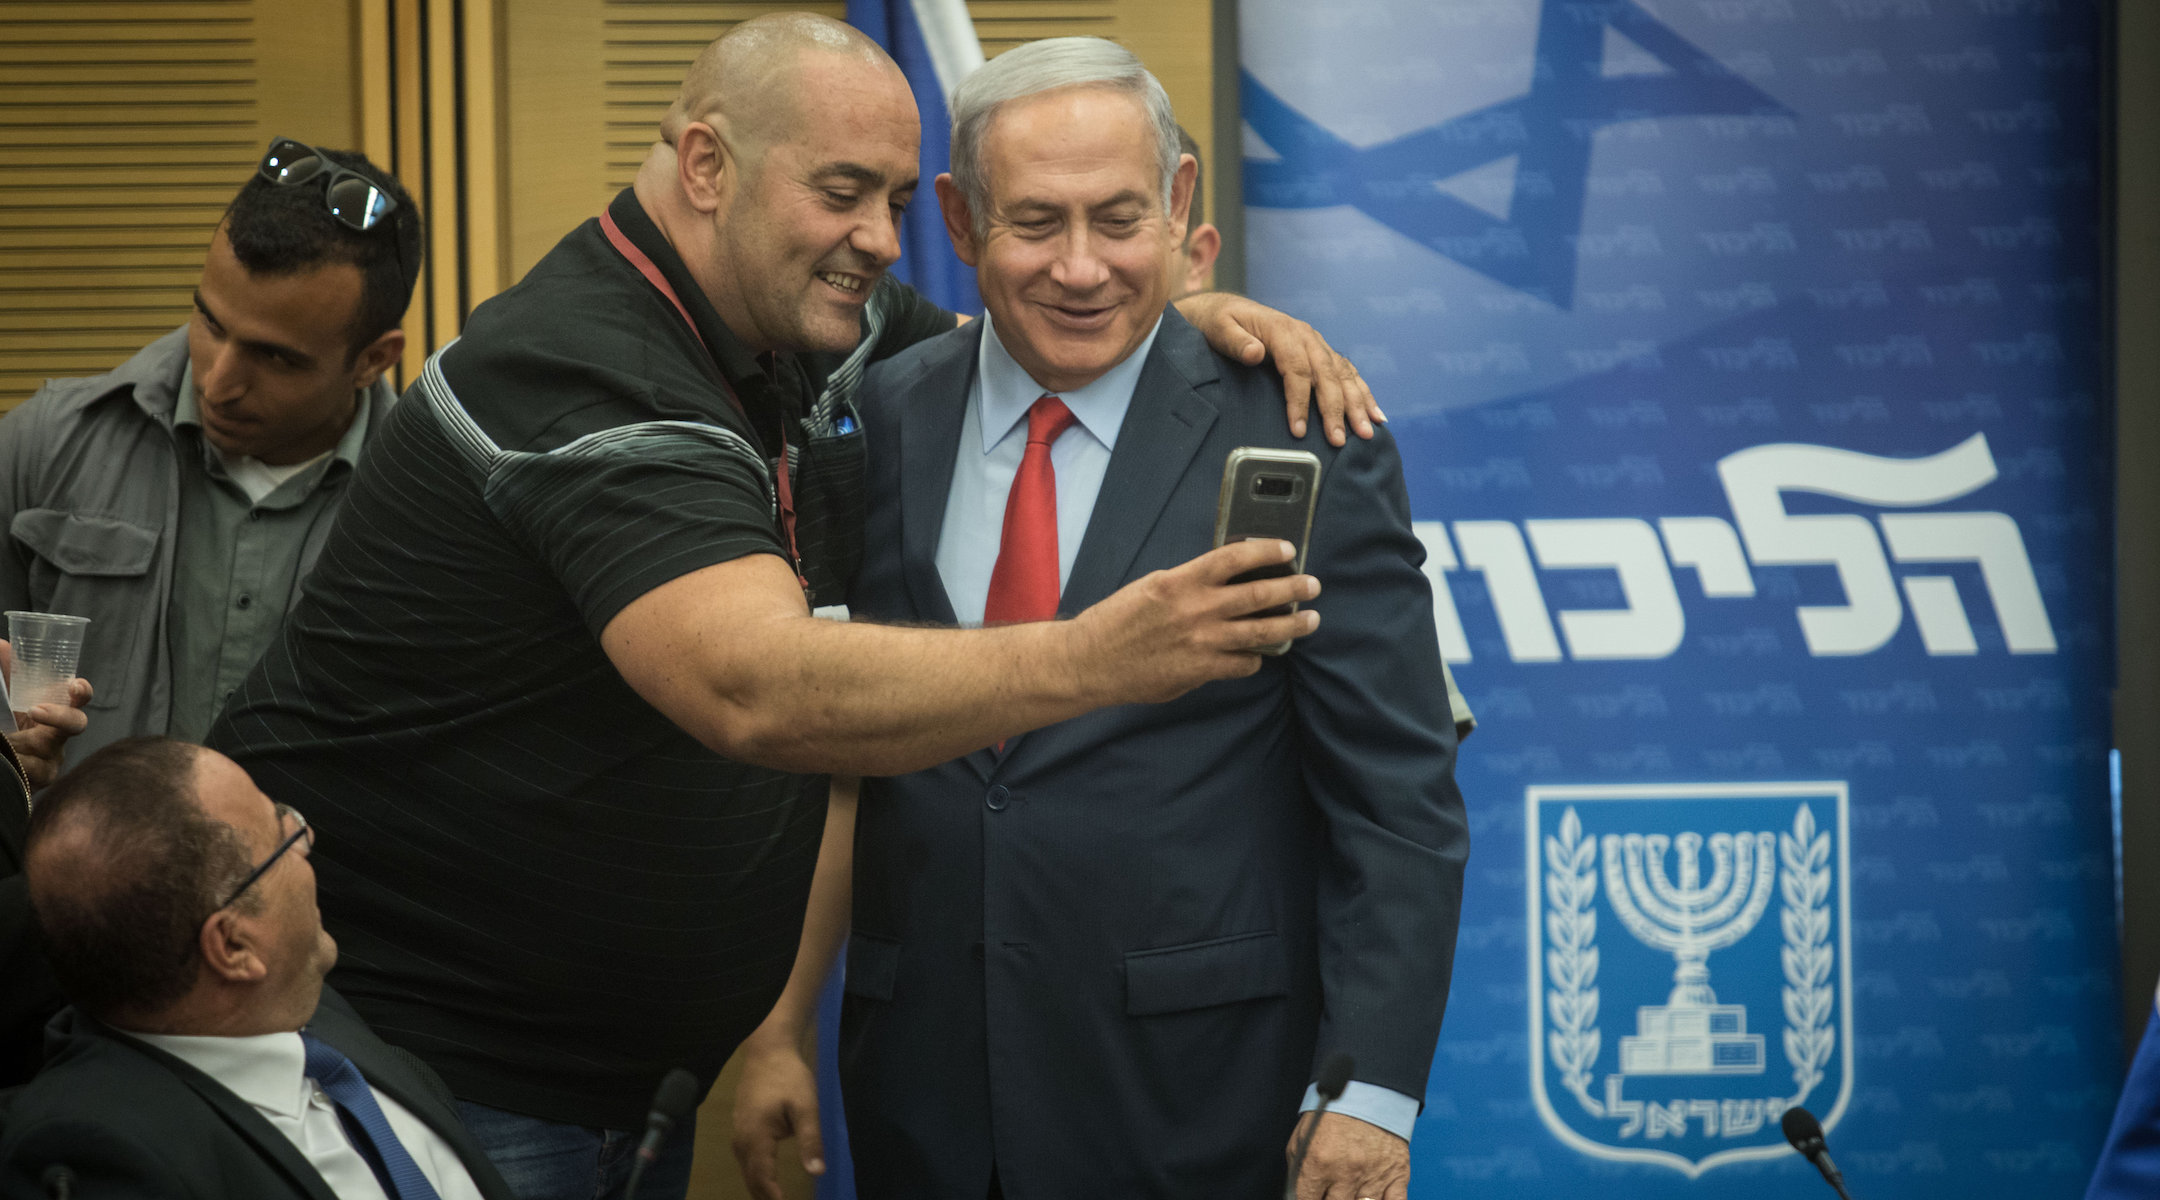 Prime Minister Benjamin Netanyahu poses for a selfie with Itzik Zarka, a Likud activist, during a Likud Party faction meeting at the Knesset, Israel's parliament, on July 9, 2018. (Hadas Parush/Flash90)